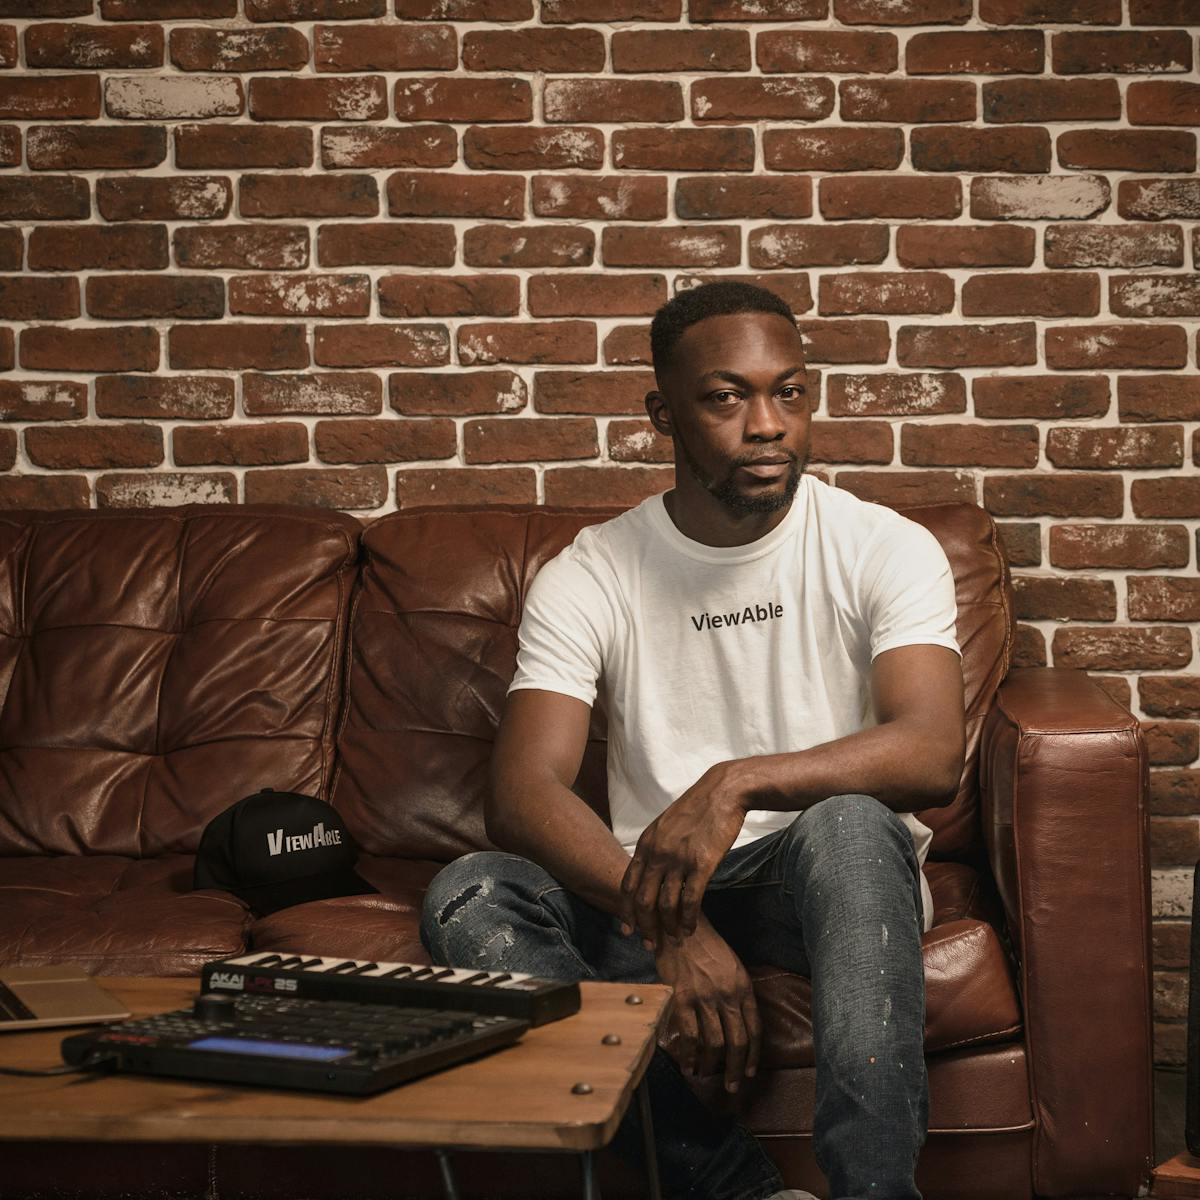 Photographic full length portrait of a man in a white t-shirt sitting on a leather sofa. In front of him to the left of the frame is a wooden table with a laptop, keyboard and beat-box. To the right of the frame is a bass speaker and a floor standing lamp.  Beside him on the sofa is a hat. A single line of text is legible on both the T-shirt and hat, reading 'Viewable'.